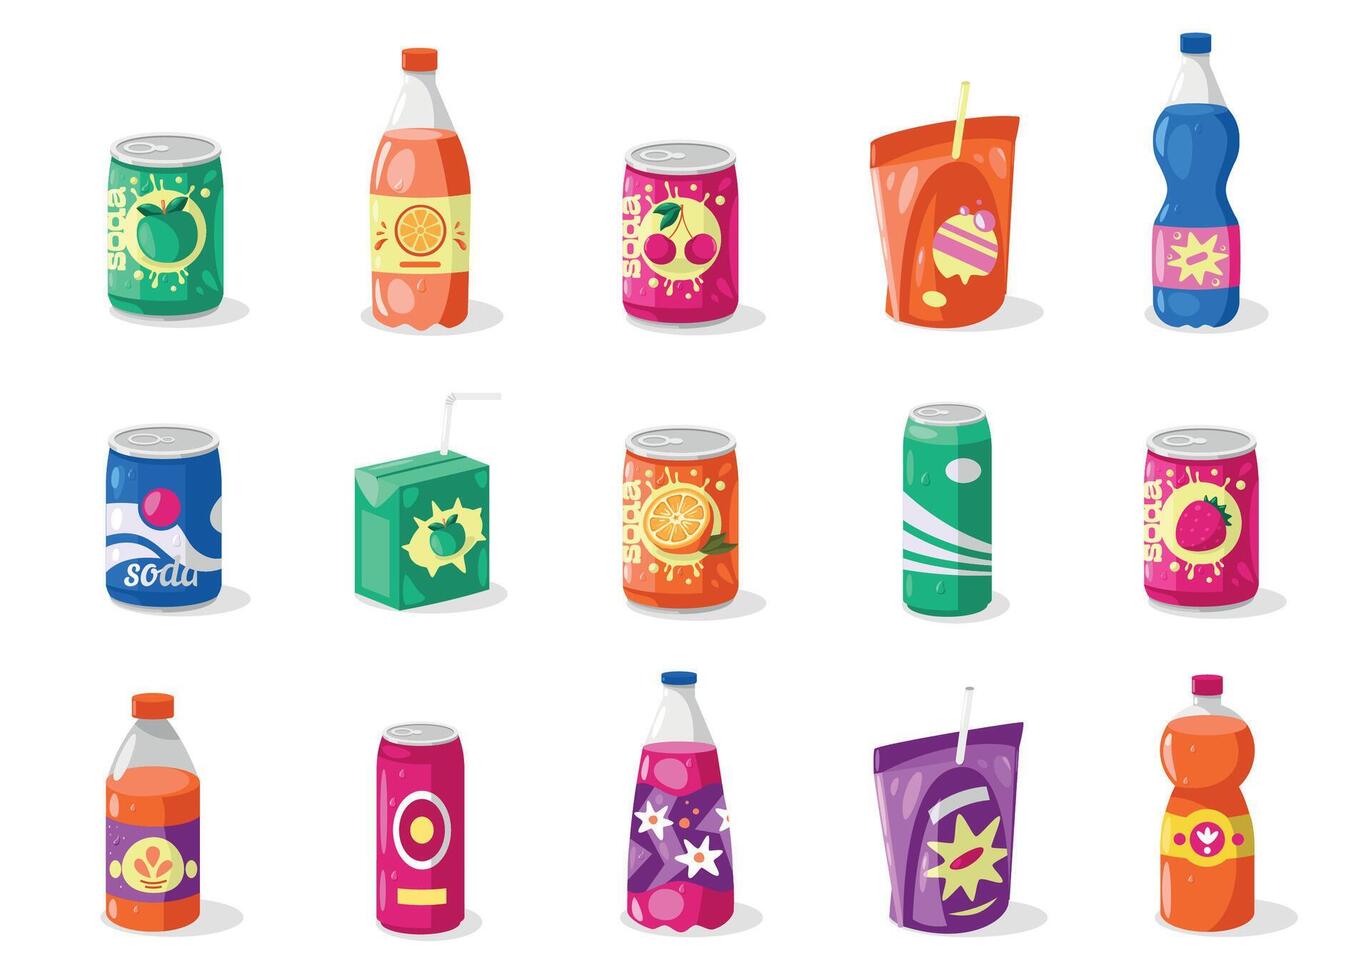 Drinks in bottles and cans. Cartoon aluminum, glass and plastic cans with different beverages, energy drink, alcohol, alcoholic beverage vector